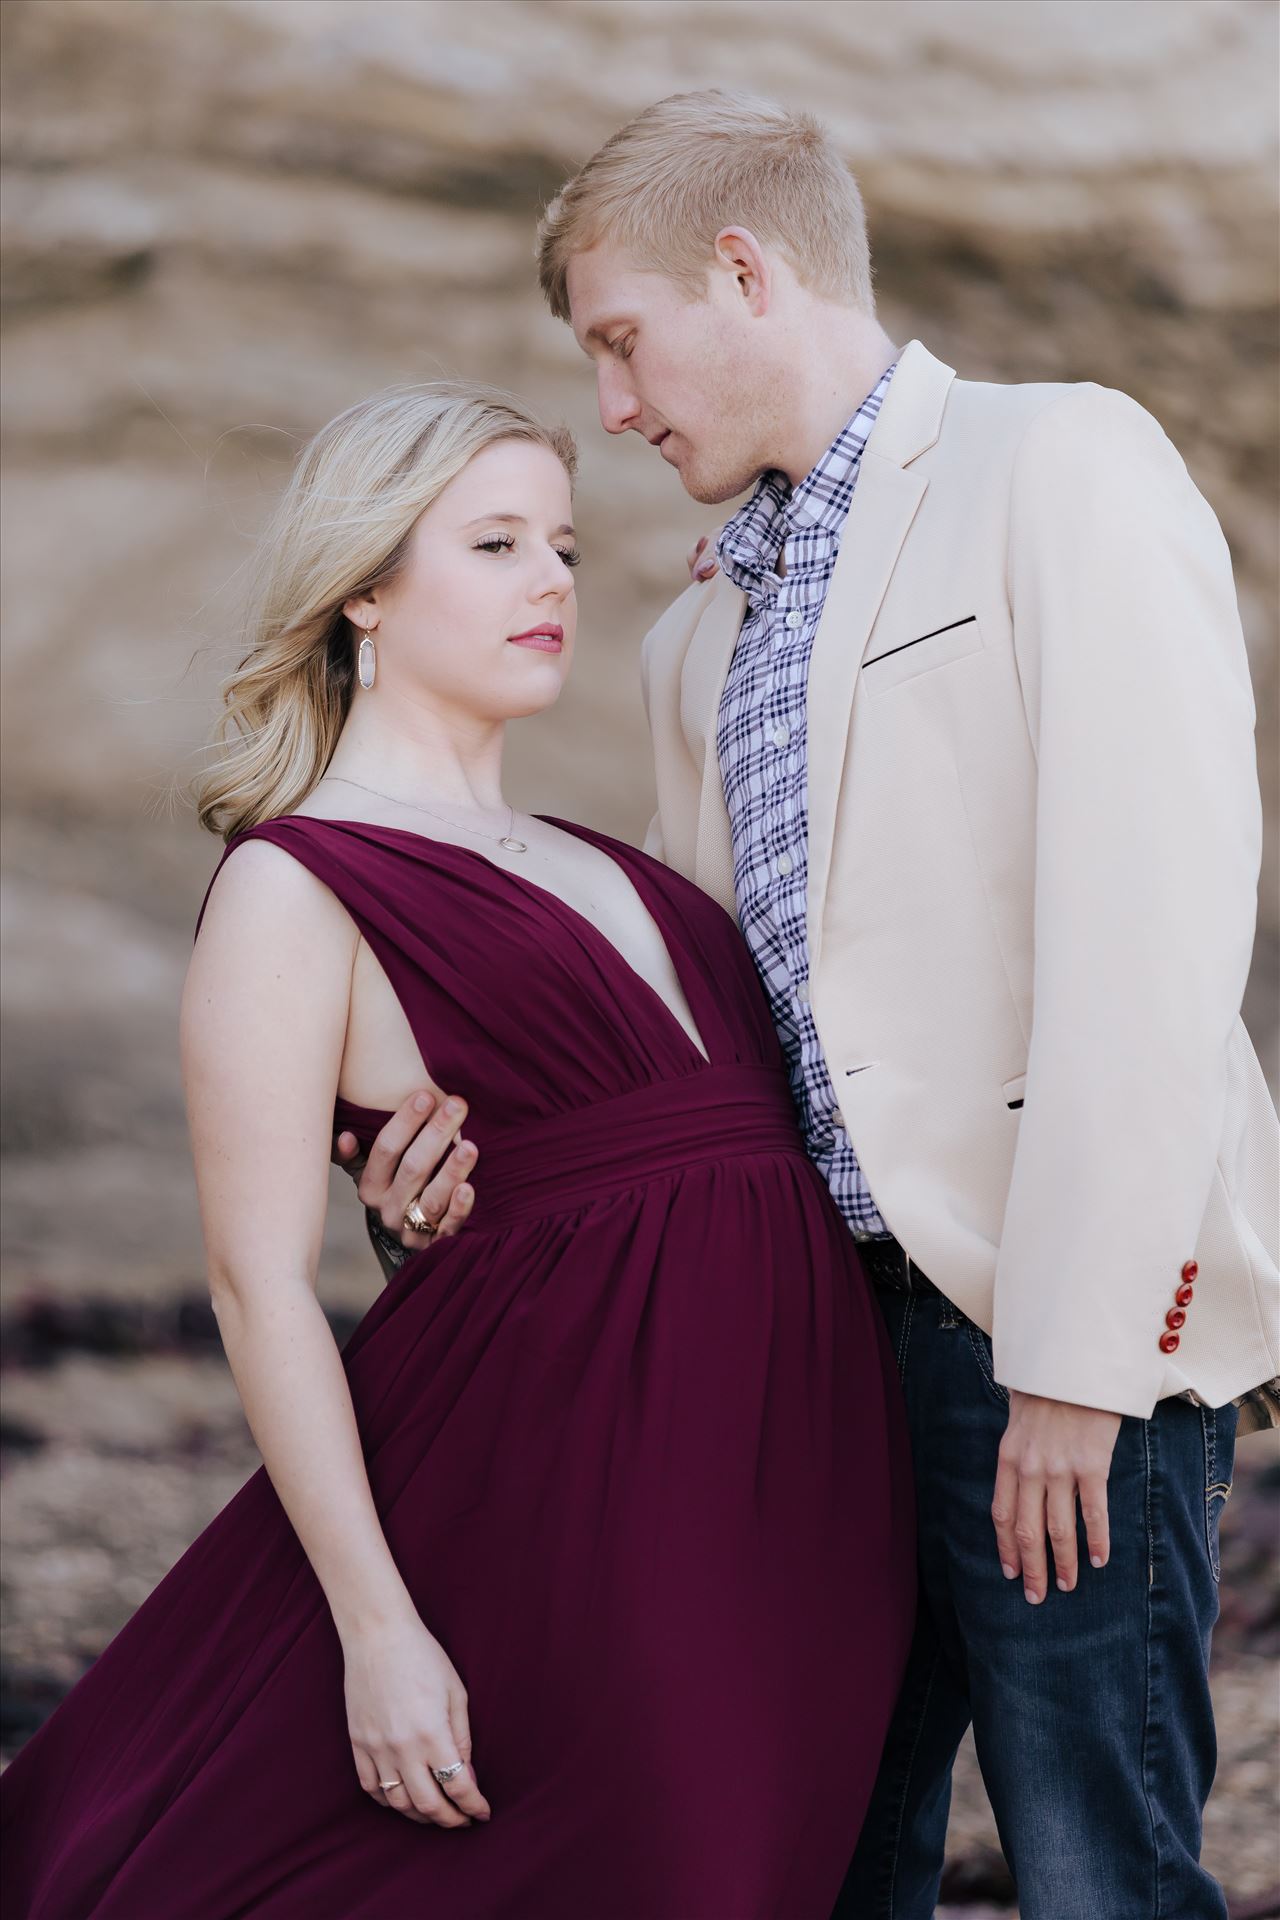 _Y9A7488.JPG - San Luis Obispo and Santa Barbara County Wedding and Engagement Photography. Mirror's Edge Photography captures Montana de Oro Engagement Session.  Romantic couple on the beach. by Sarah Williams